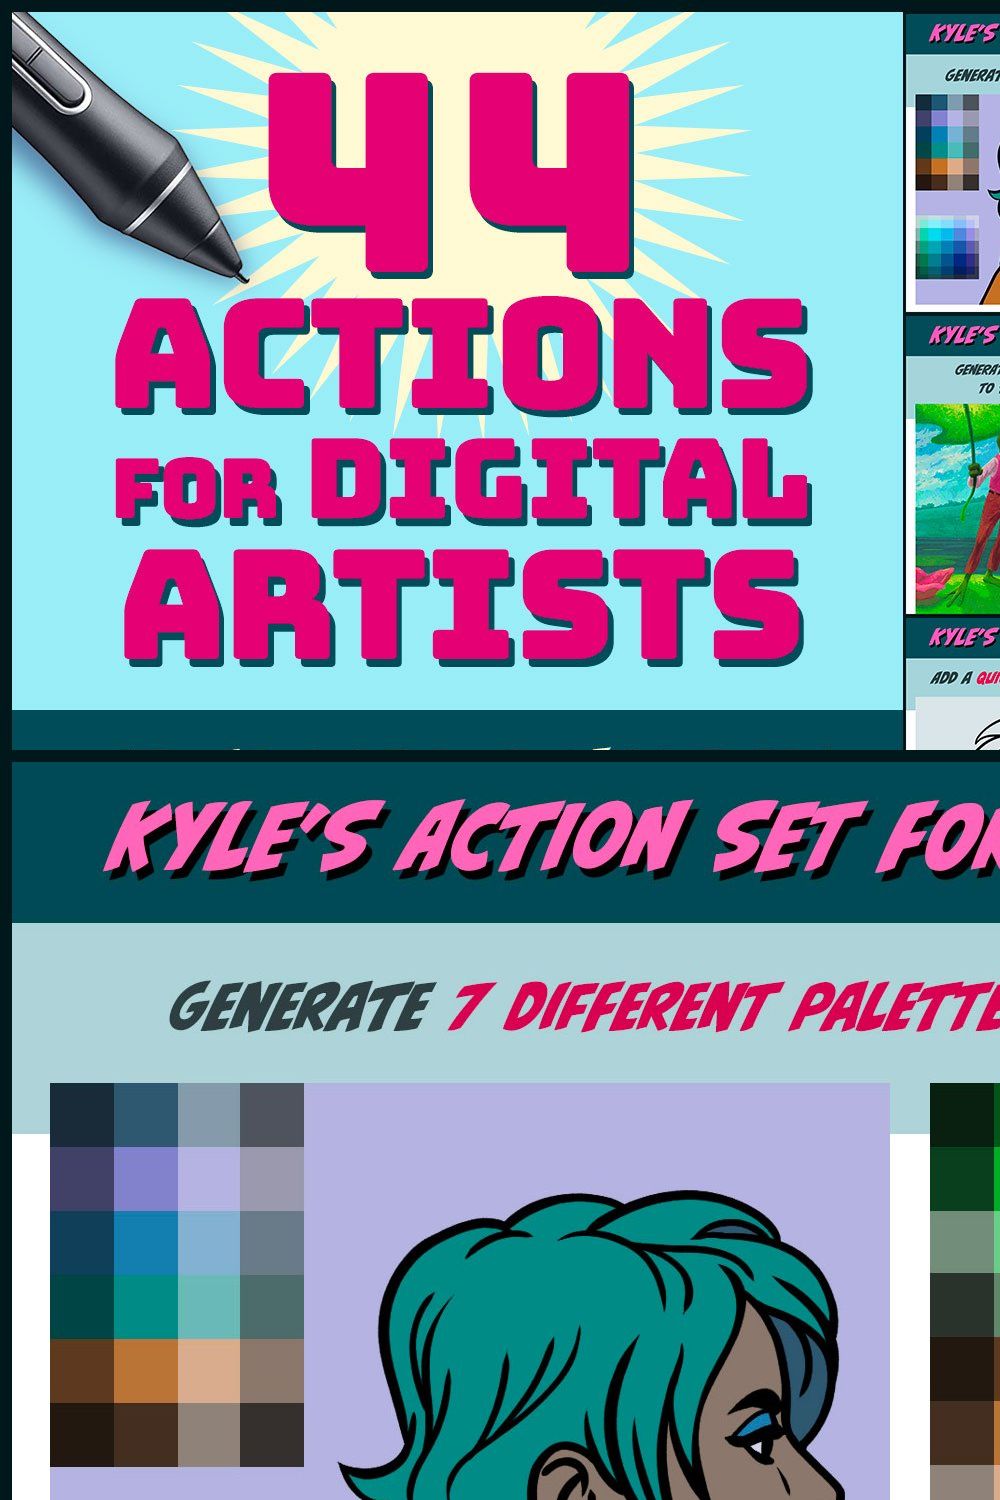 Kyle's Actions for Photoshop Artists pinterest preview image.